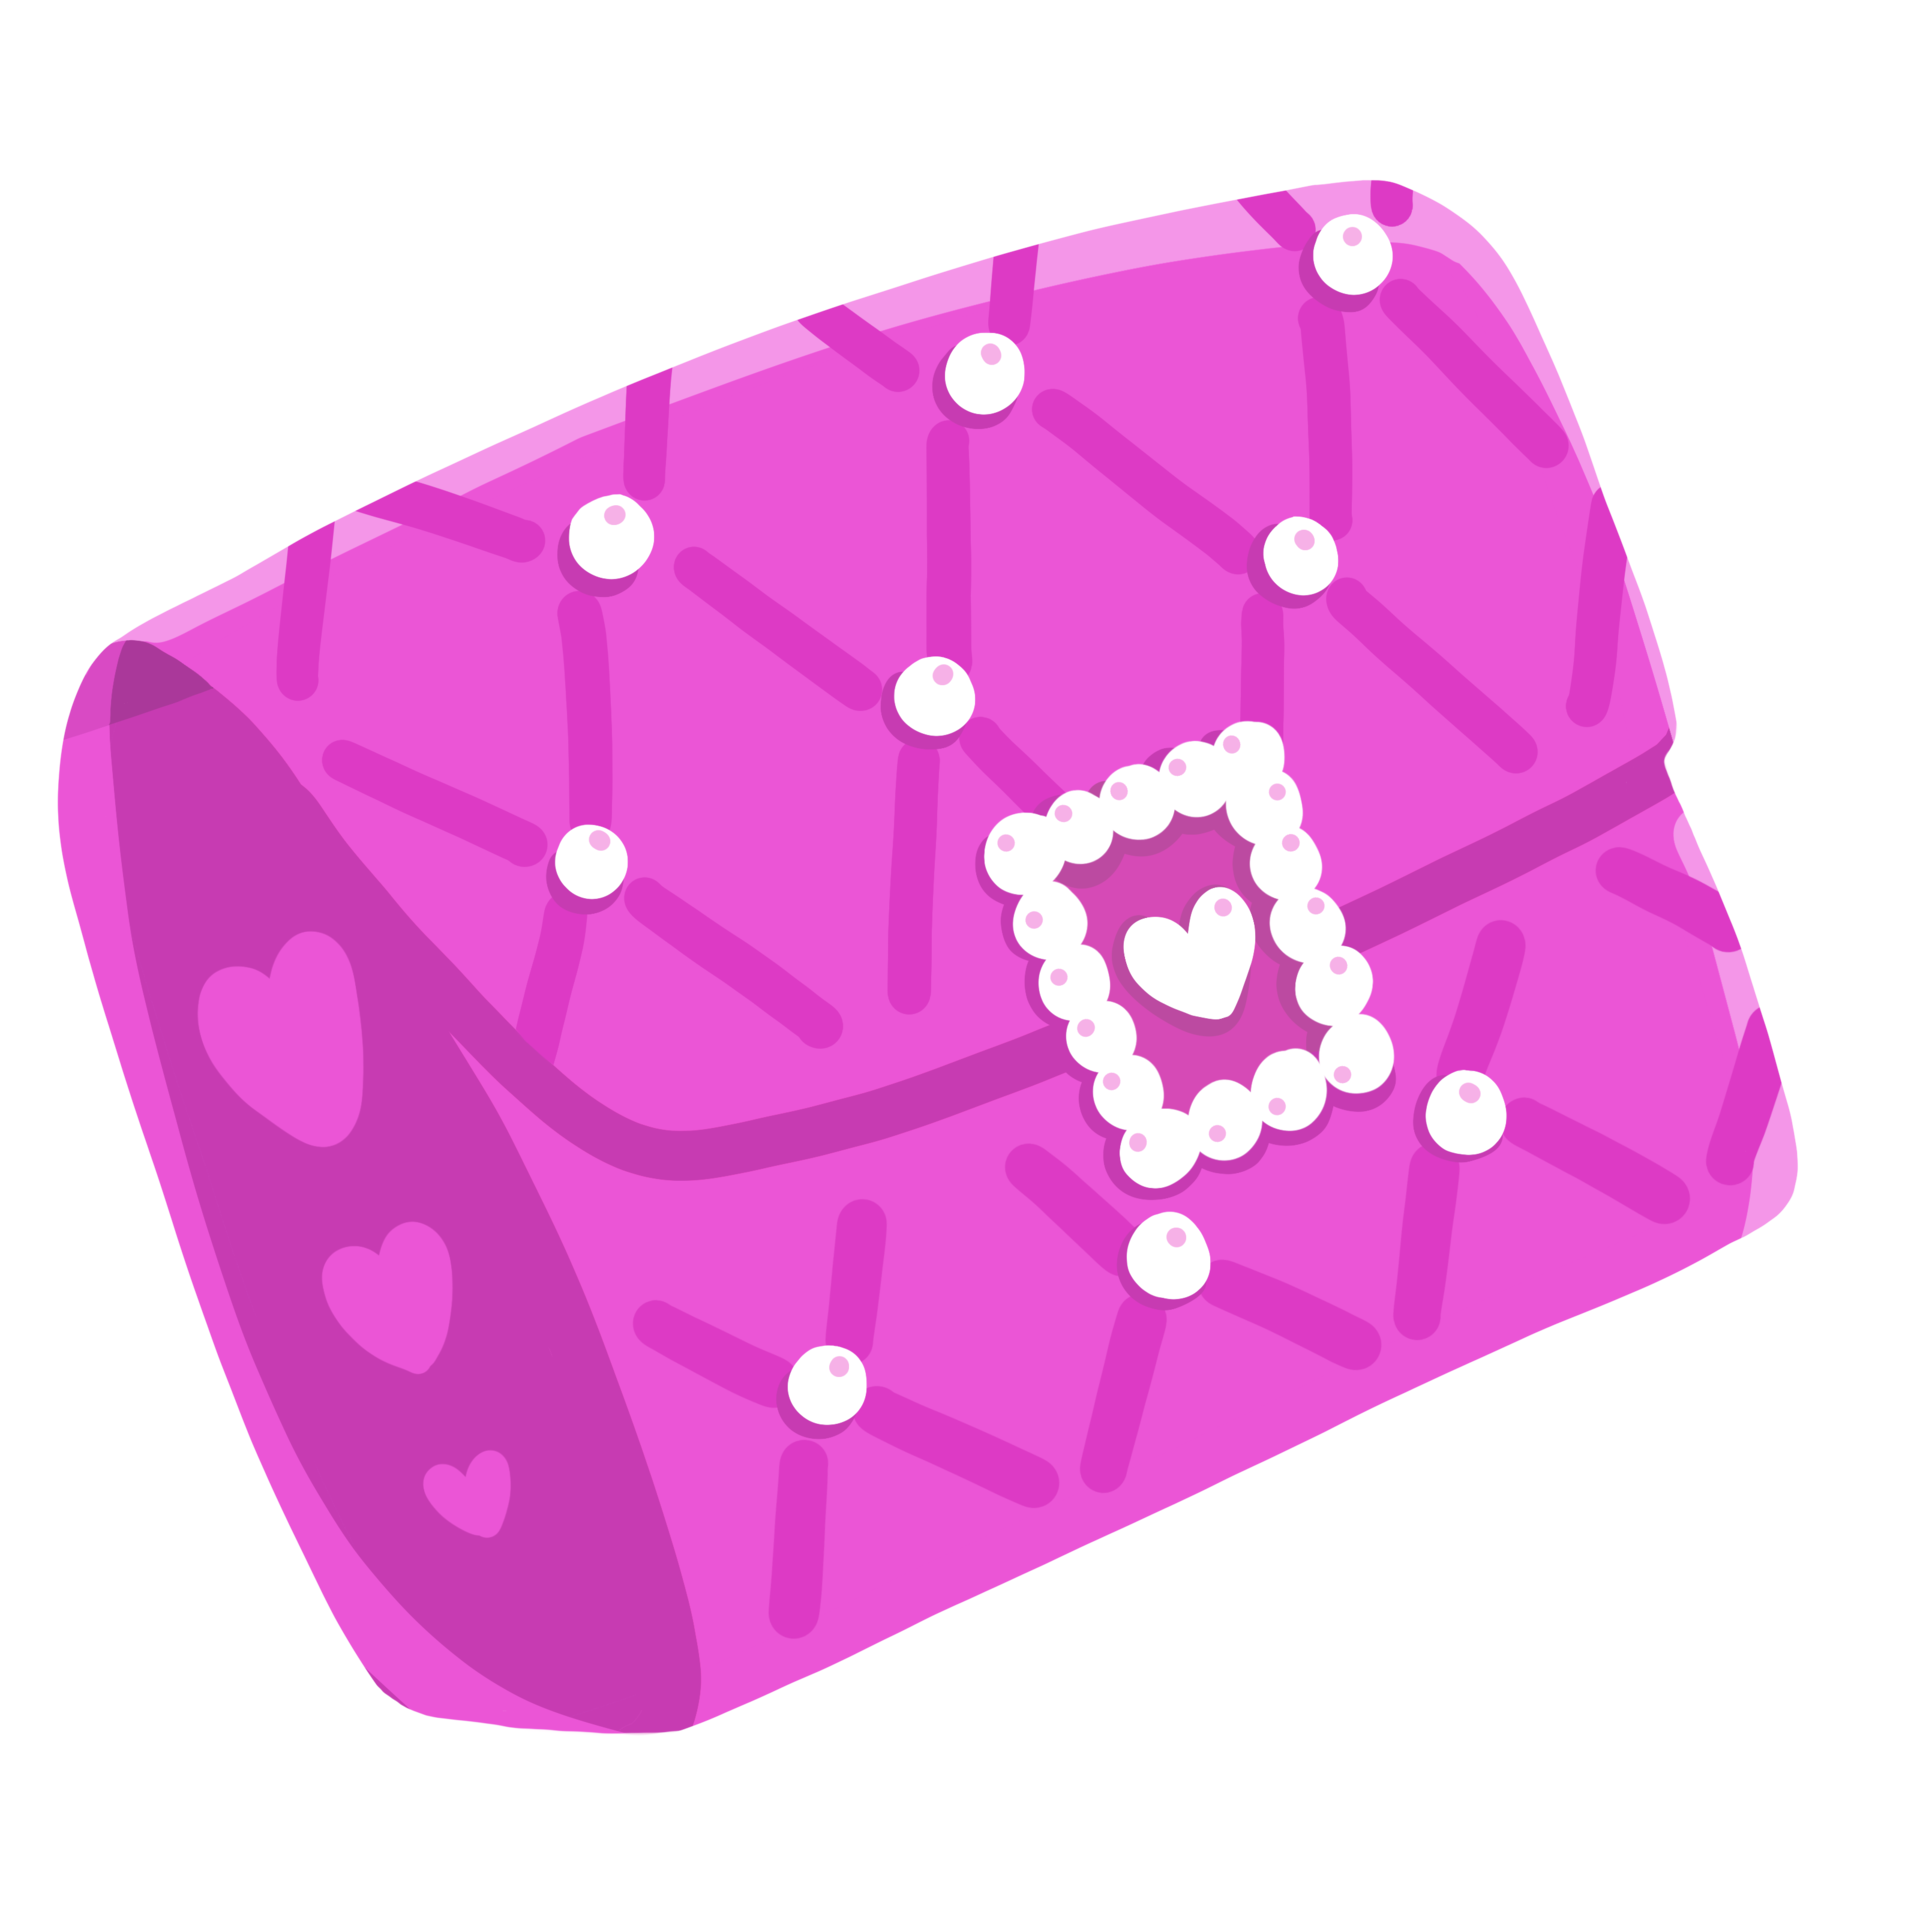 Cute Hand Drawn Hot Pink Luxury Purse Bag with Pearl Cartoon Illustration  27147791 PNG